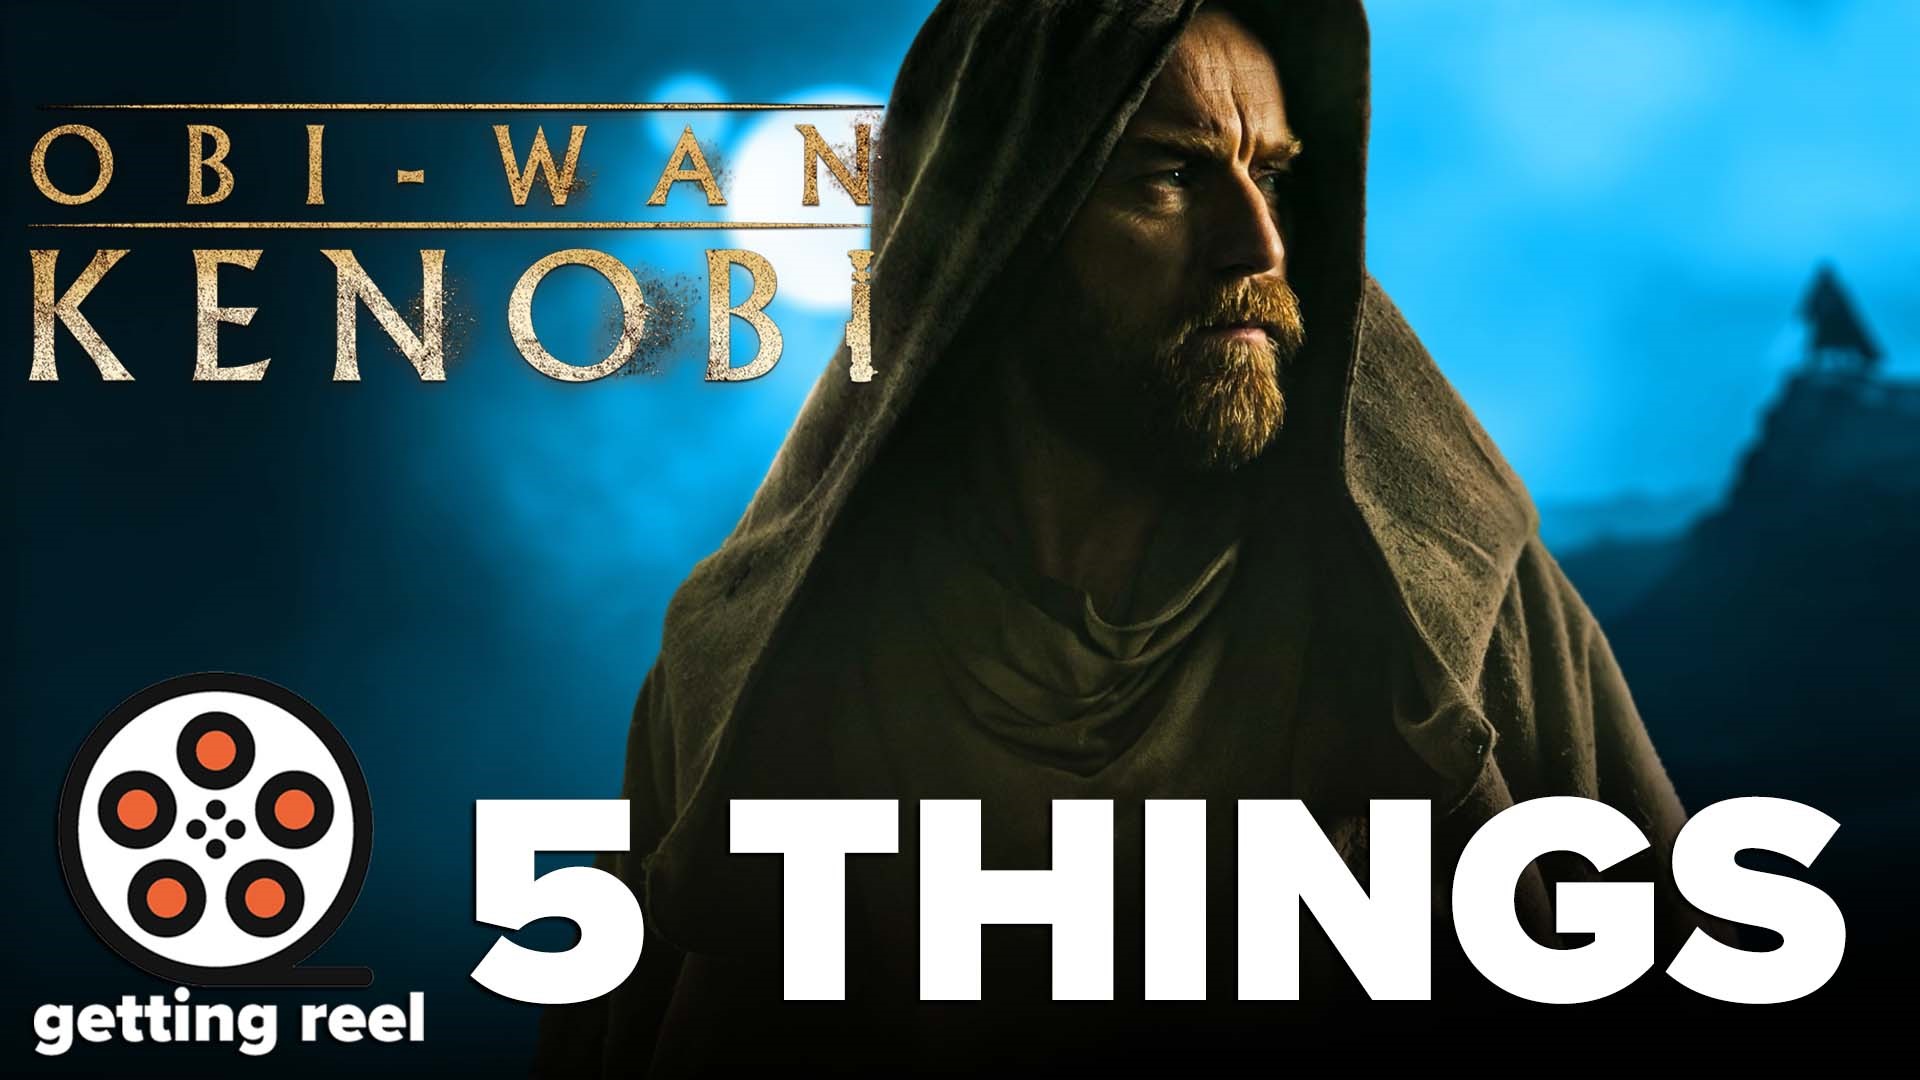 The hype was through the roof for the return of Obi-Wan and yet the show failed hard. We discuss why and what could have been.